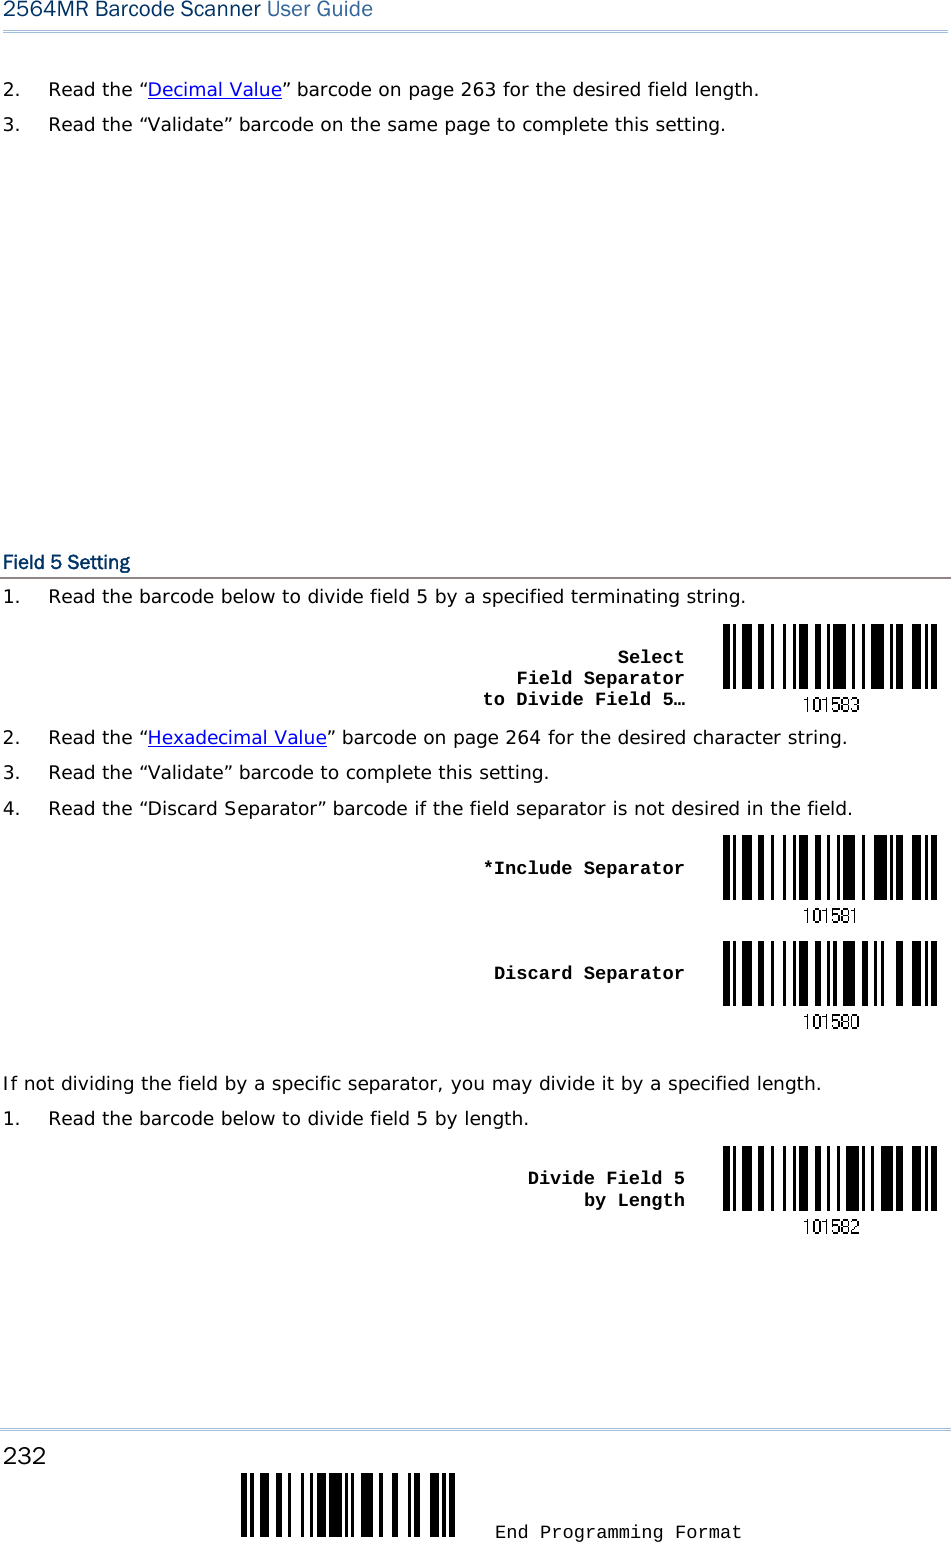 232  End Programming Format 2564MR Barcode Scanner User Guide  2.  Read the “Decimal Value” barcode on page 263 for the desired field length. 3.  Read the “Validate” barcode on the same page to complete this setting.                    Field 5 Setting 1.  Read the barcode below to divide field 5 by a specified terminating string.  Select  Field Separator  to Divide Field 5…2.  Read the “Hexadecimal Value” barcode on page 264 for the desired character string. 3.  Read the “Validate” barcode to complete this setting. 4.  Read the “Discard Separator” barcode if the field separator is not desired in the field.  *Include Separator Discard Separator If not dividing the field by a specific separator, you may divide it by a specified length. 1.  Read the barcode below to divide field 5 by length.  Divide Field 5  by Length